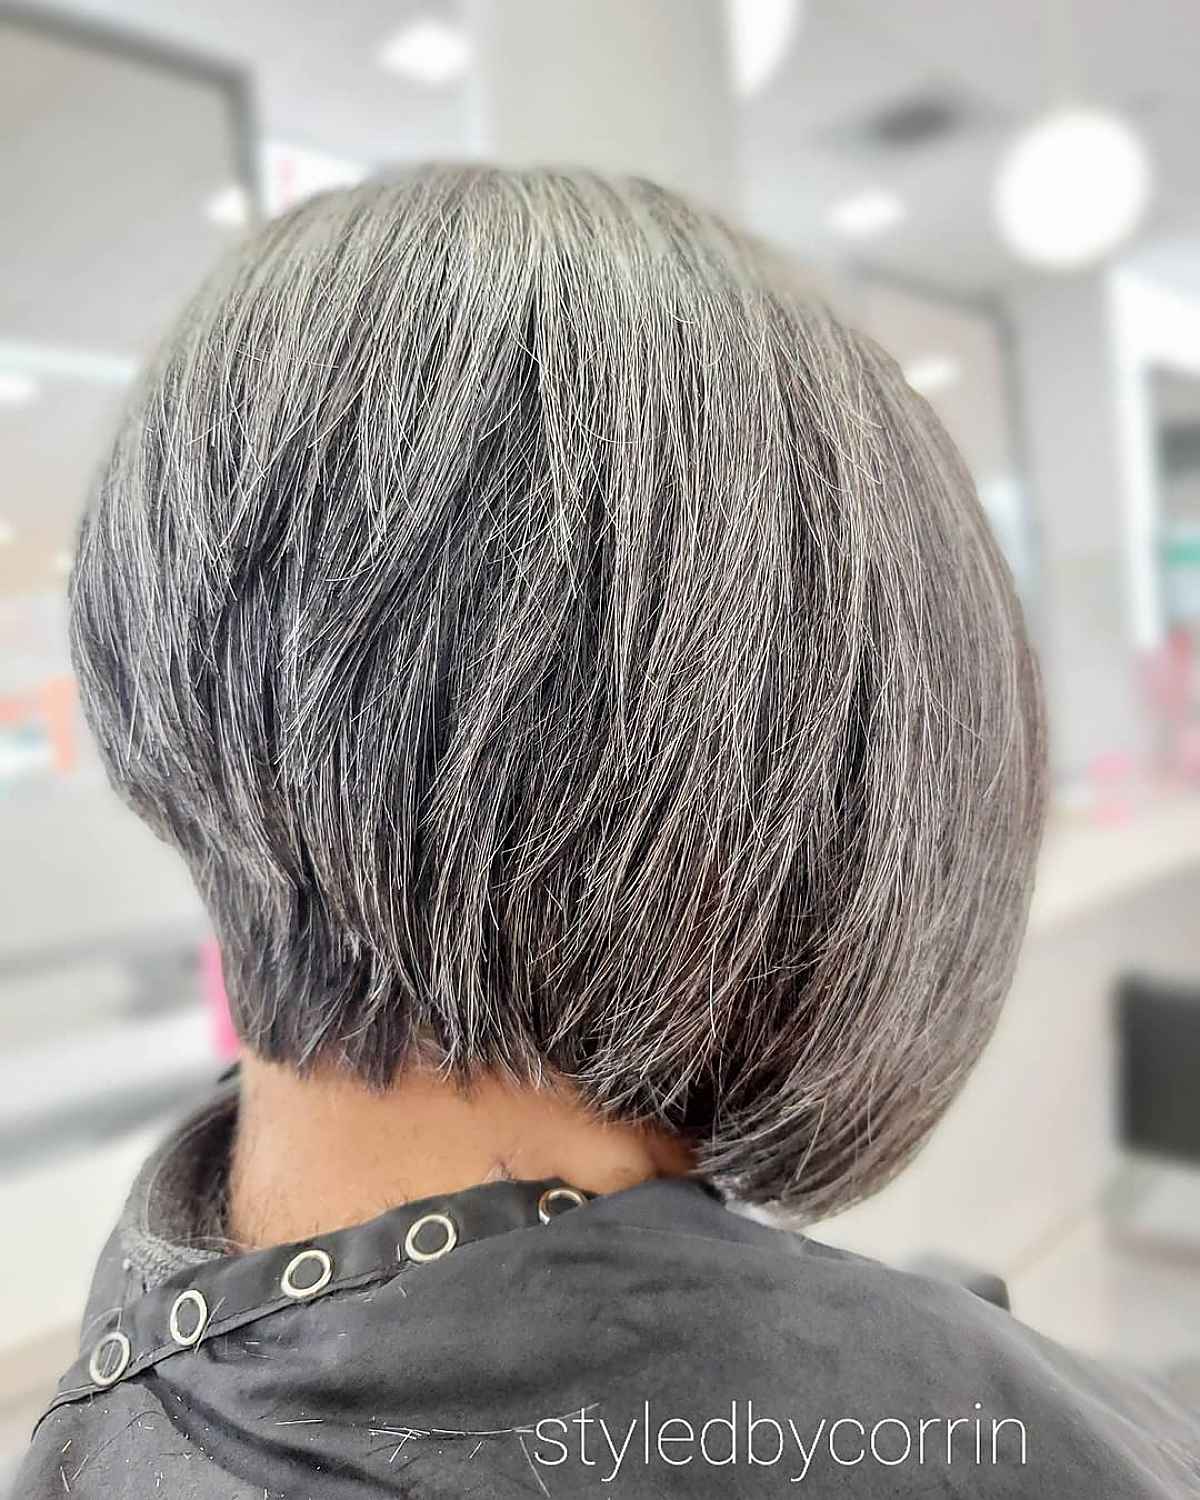 A woman over 60 with salt and pepper hair and a wedge cut